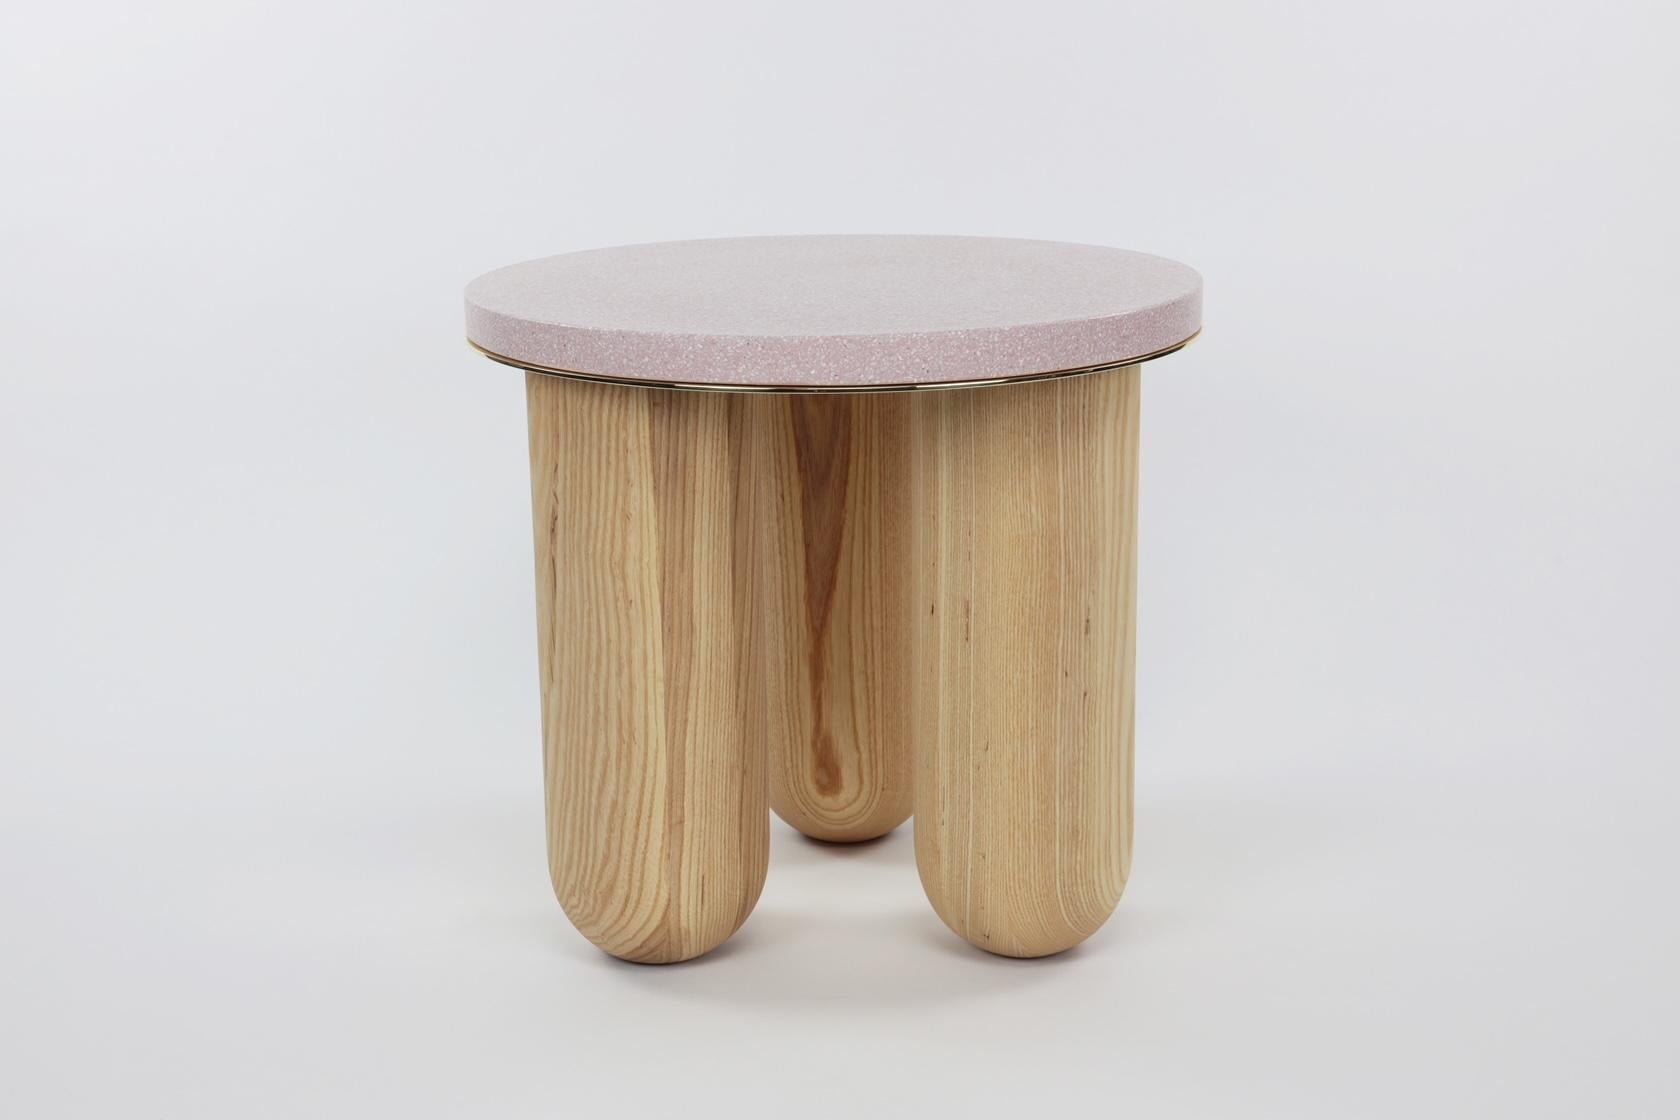 Six inch diameter turnt legs support a blush terrazzo top sitting on a plate of polished brass. The table is contemporary with a classic feel sure to pass the test of time!
Made in Los Angeles.
Signed.